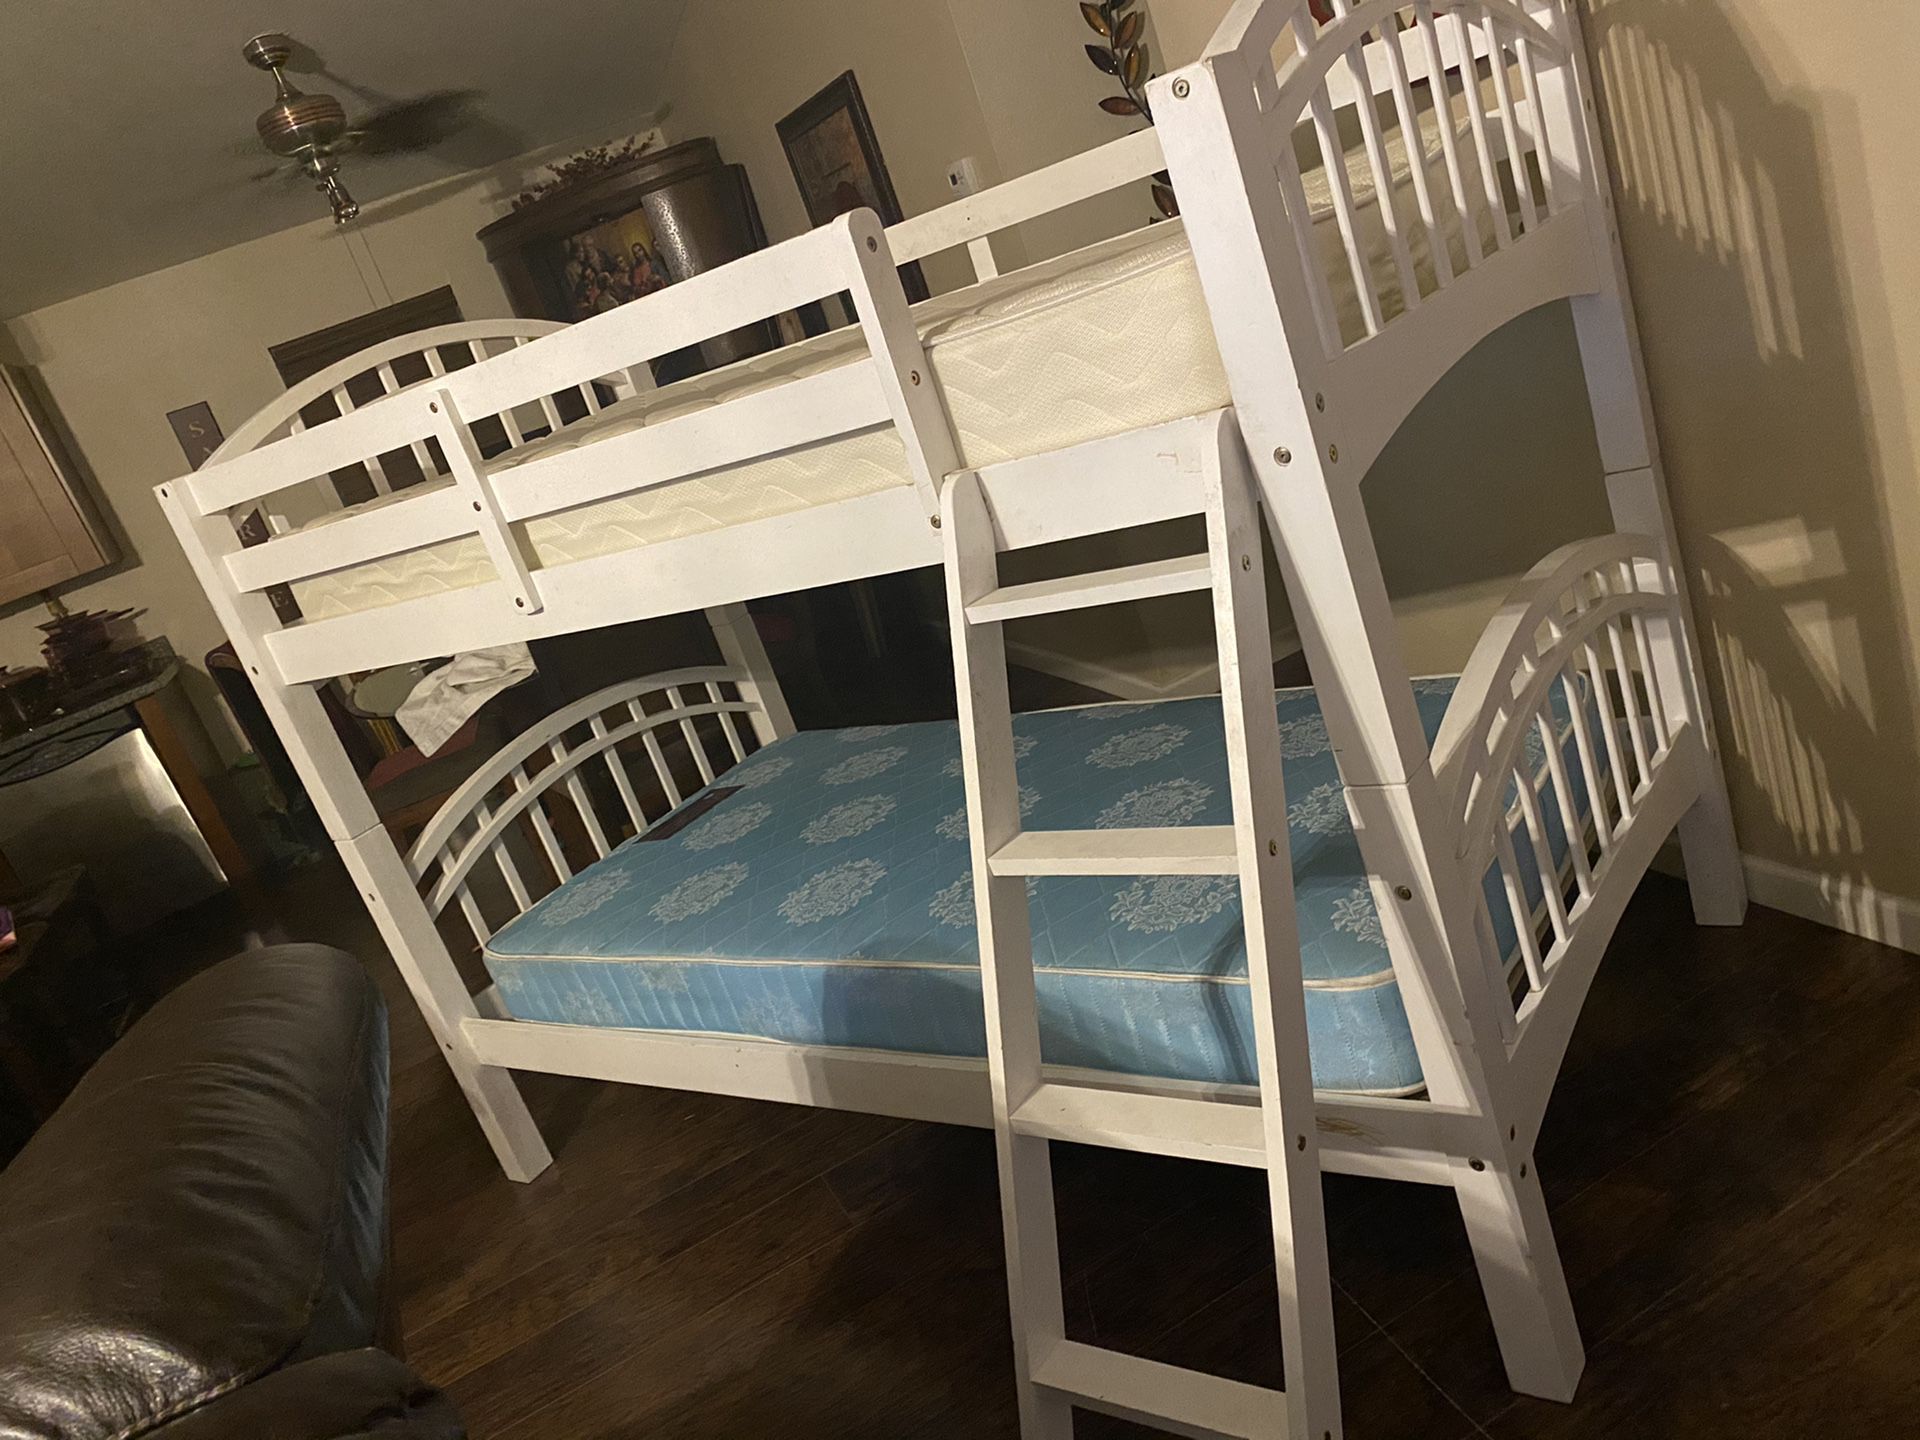 TWIN BUNK BEDS PENDING SALE! Thanks